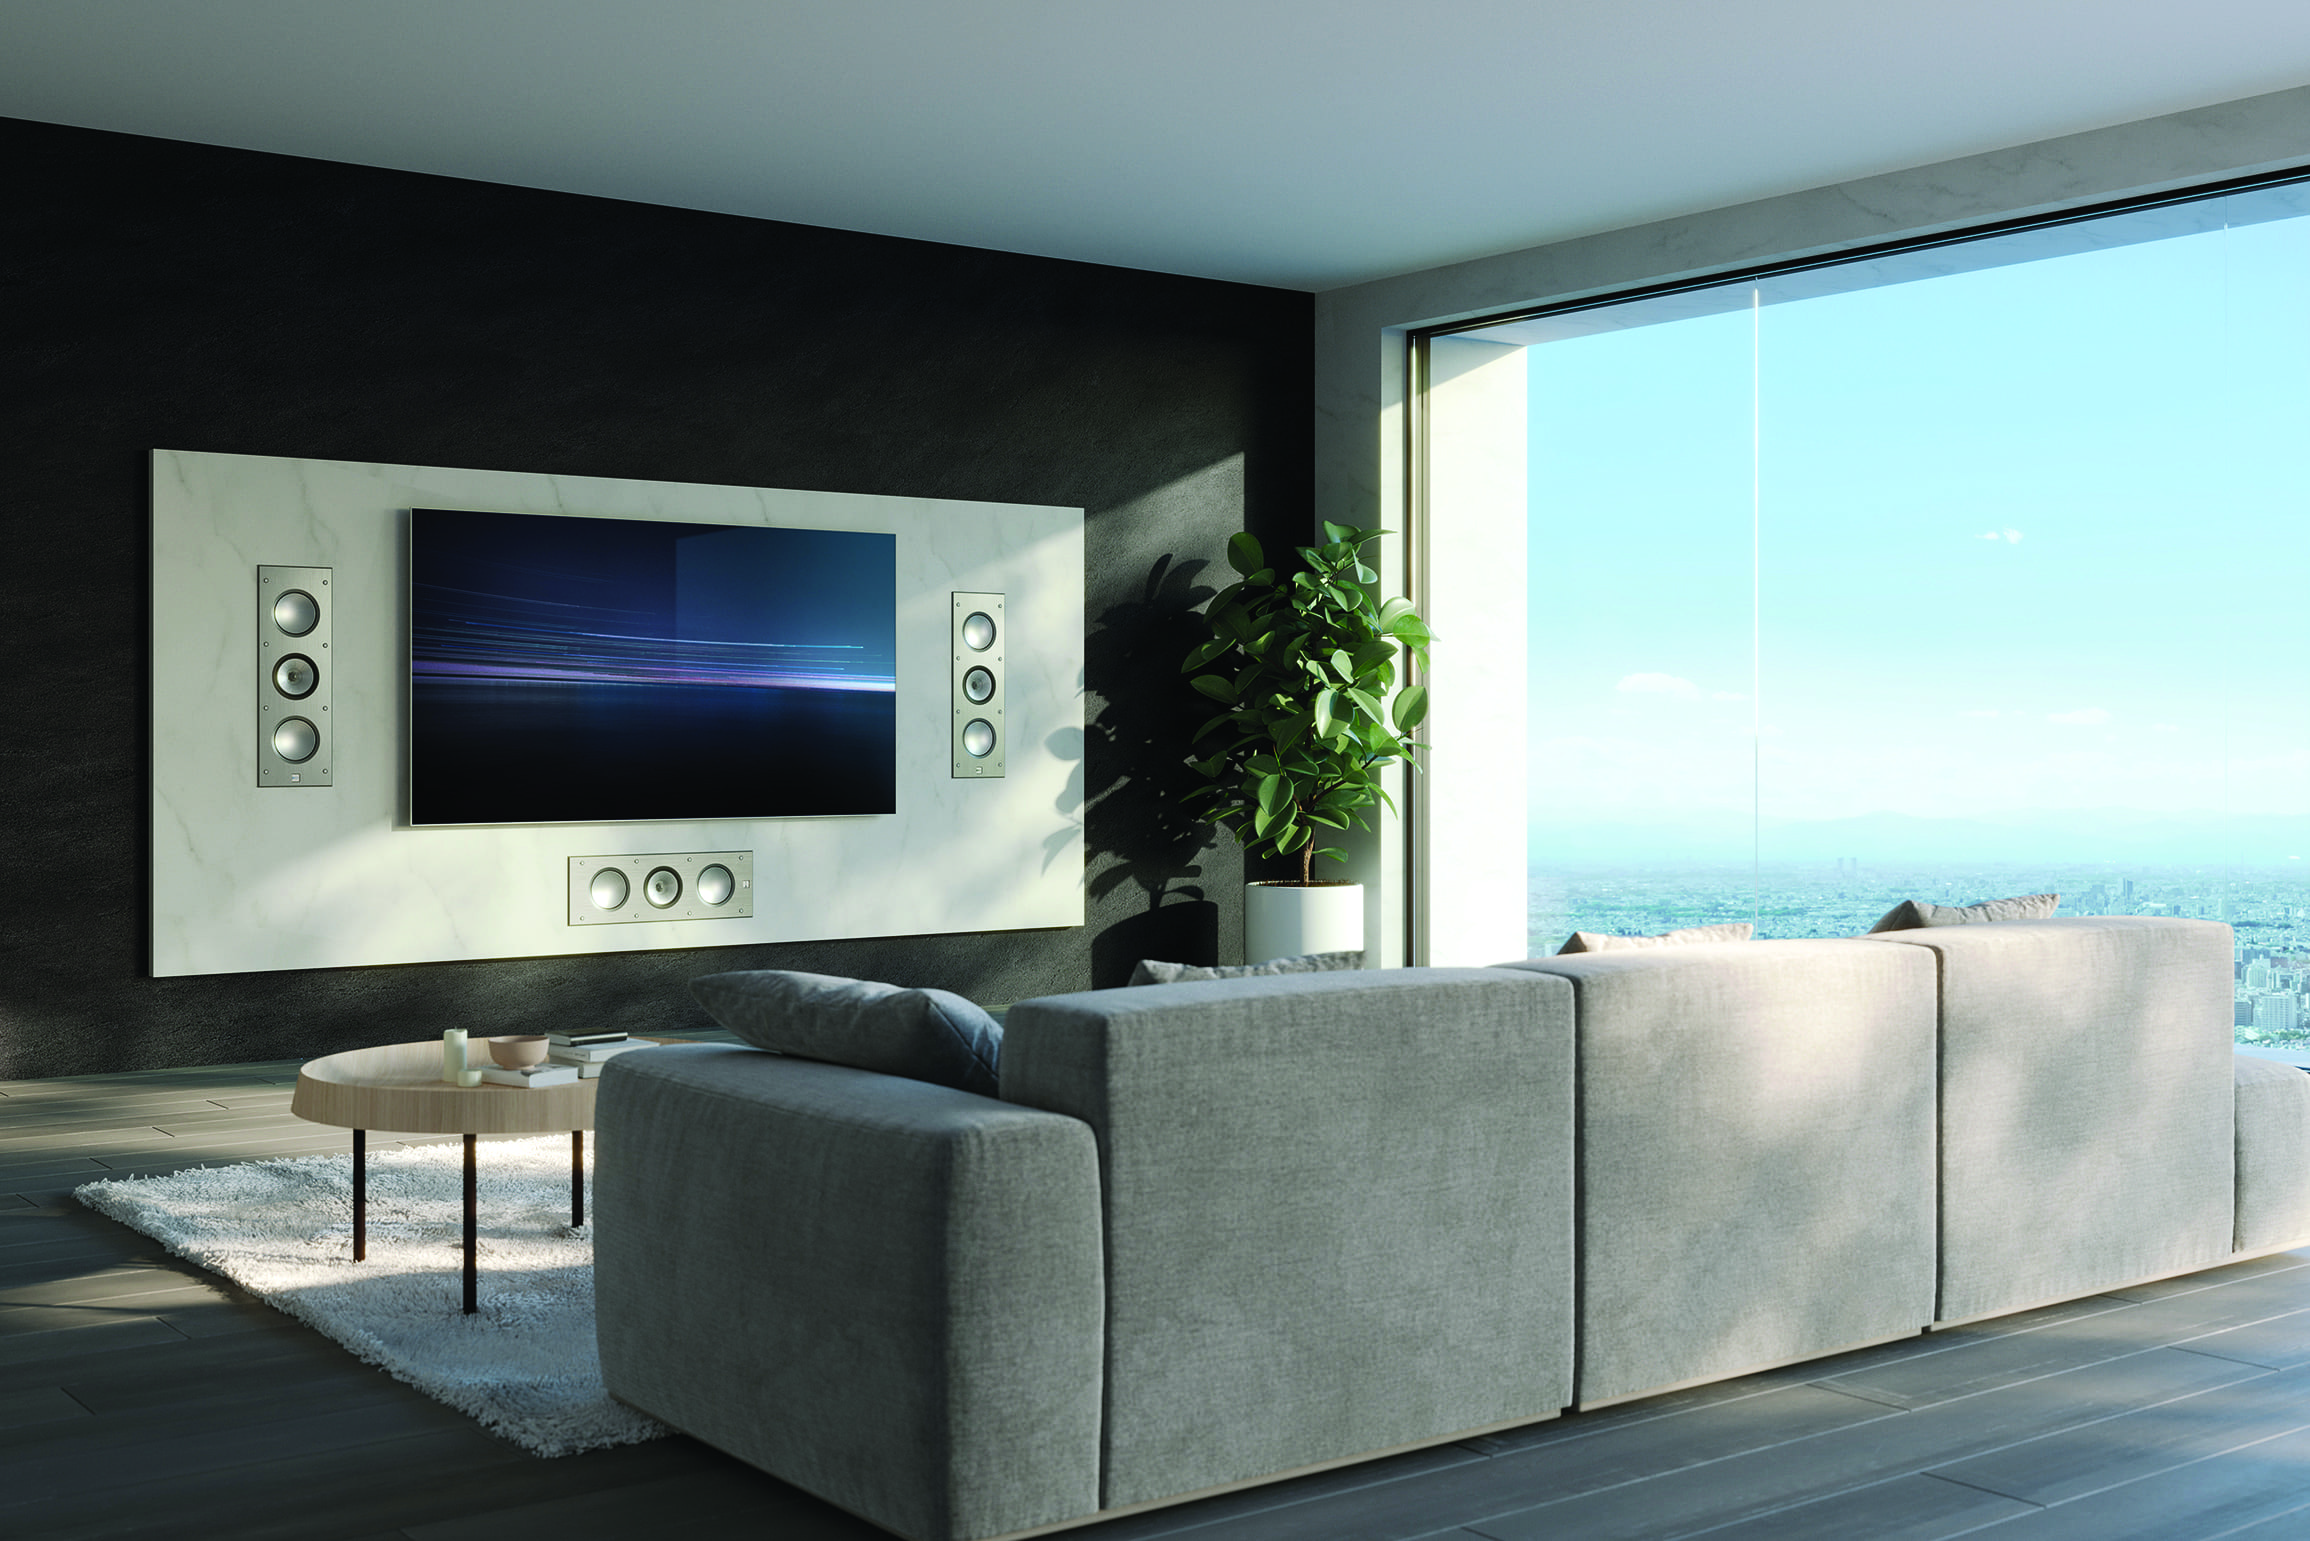 KEF Introduces Two New THX® Certified Architectural Speakers